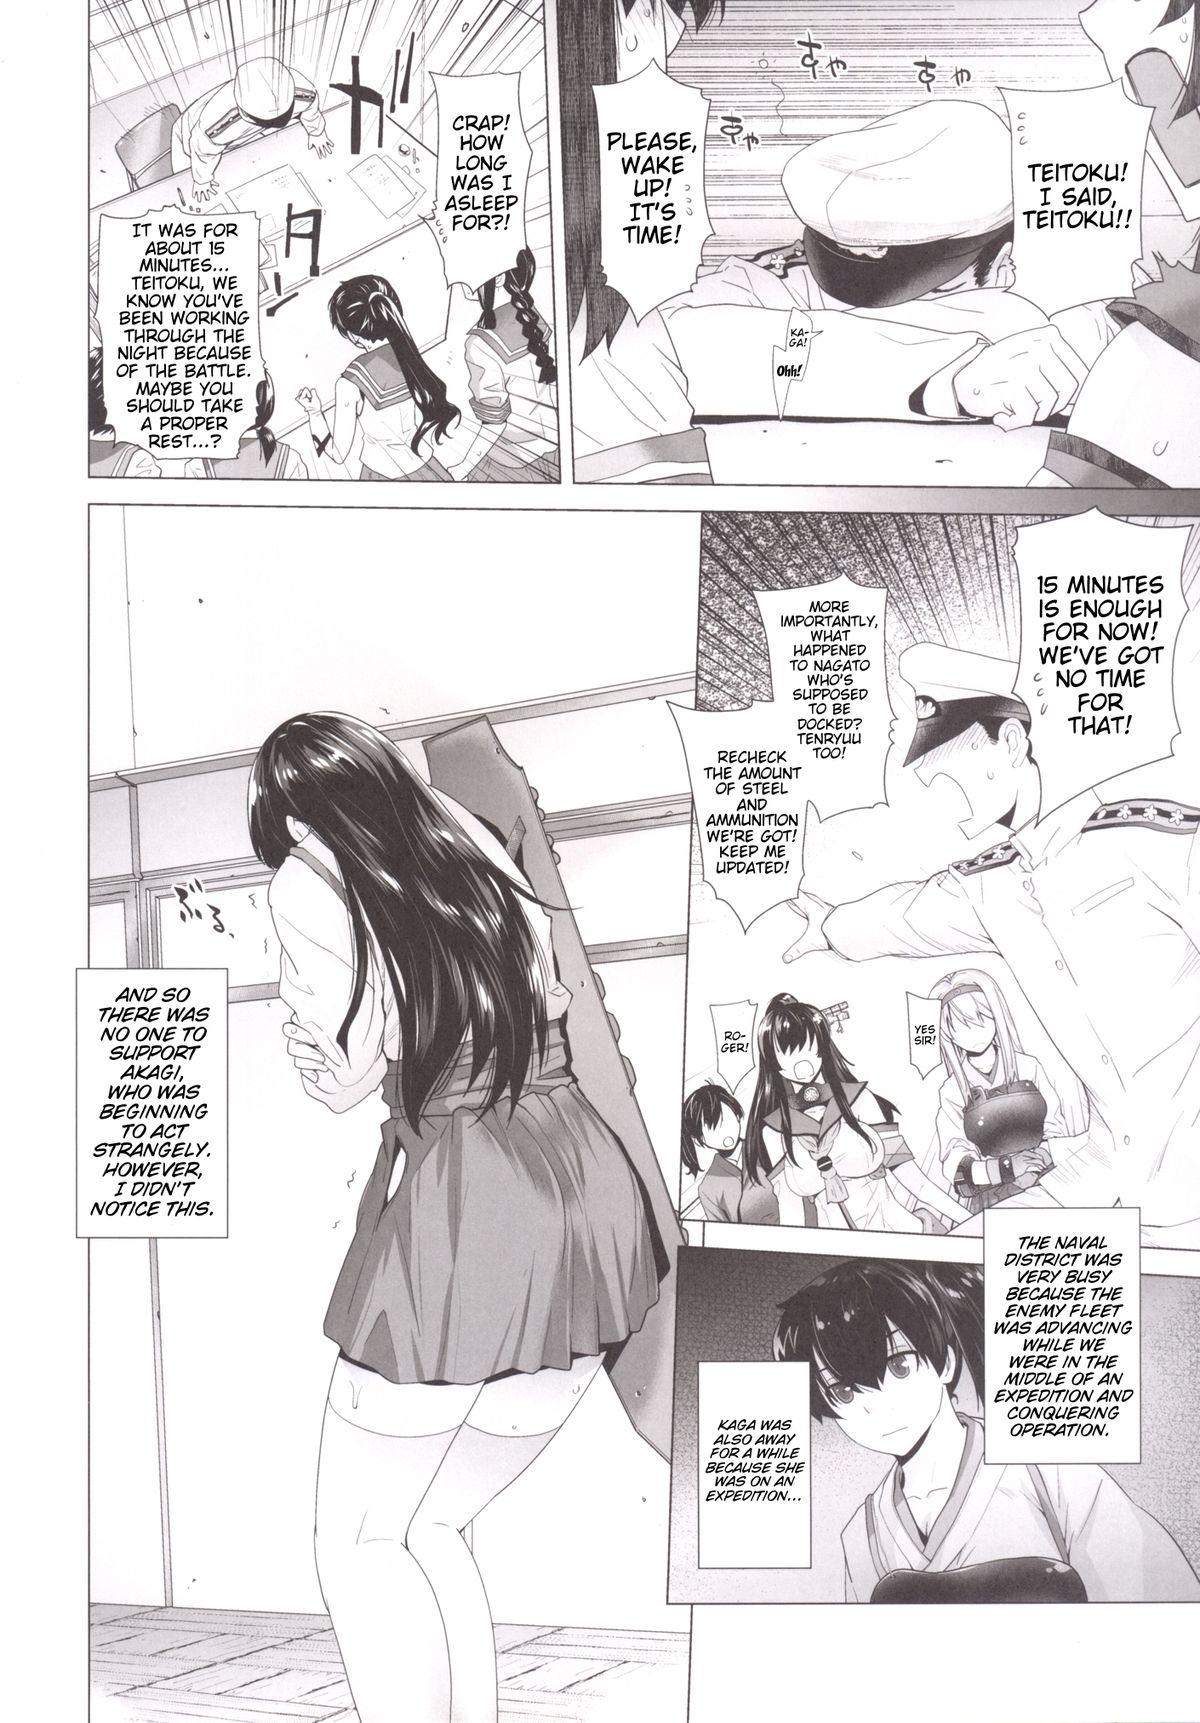 Best Blowjob COMING EVENT 2 - Kantai collection Reverse - Page 7